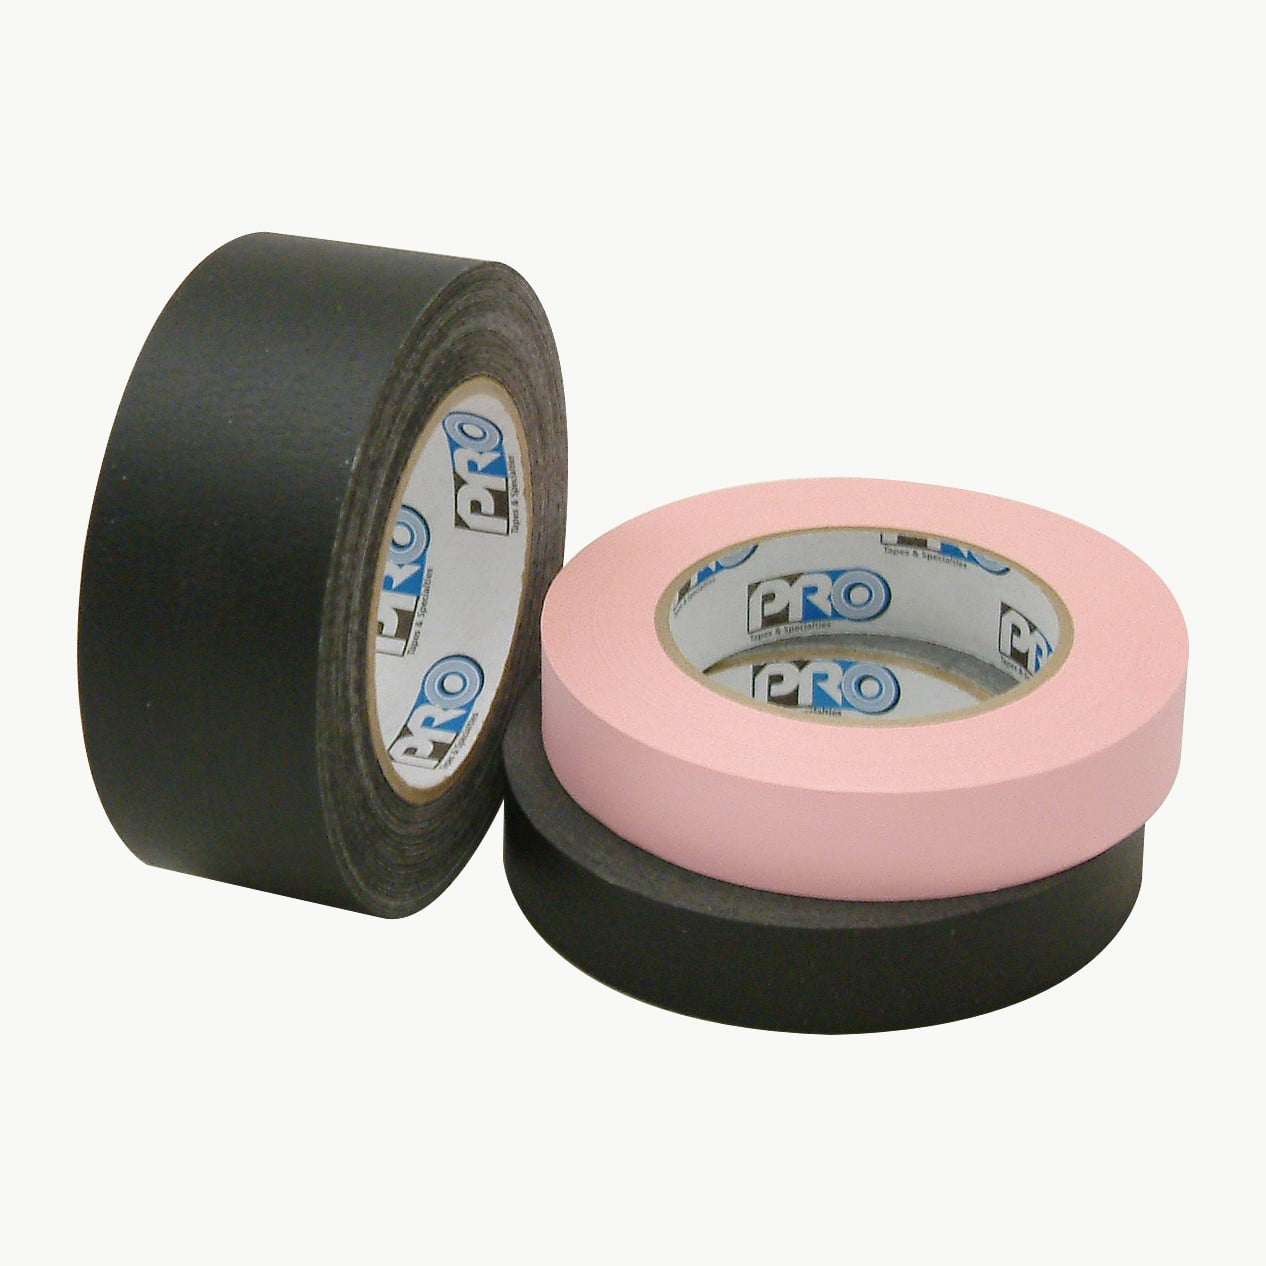 x 60 yds. Pro Tapes PRO-46 Colored Masking Tape 1 in Black 